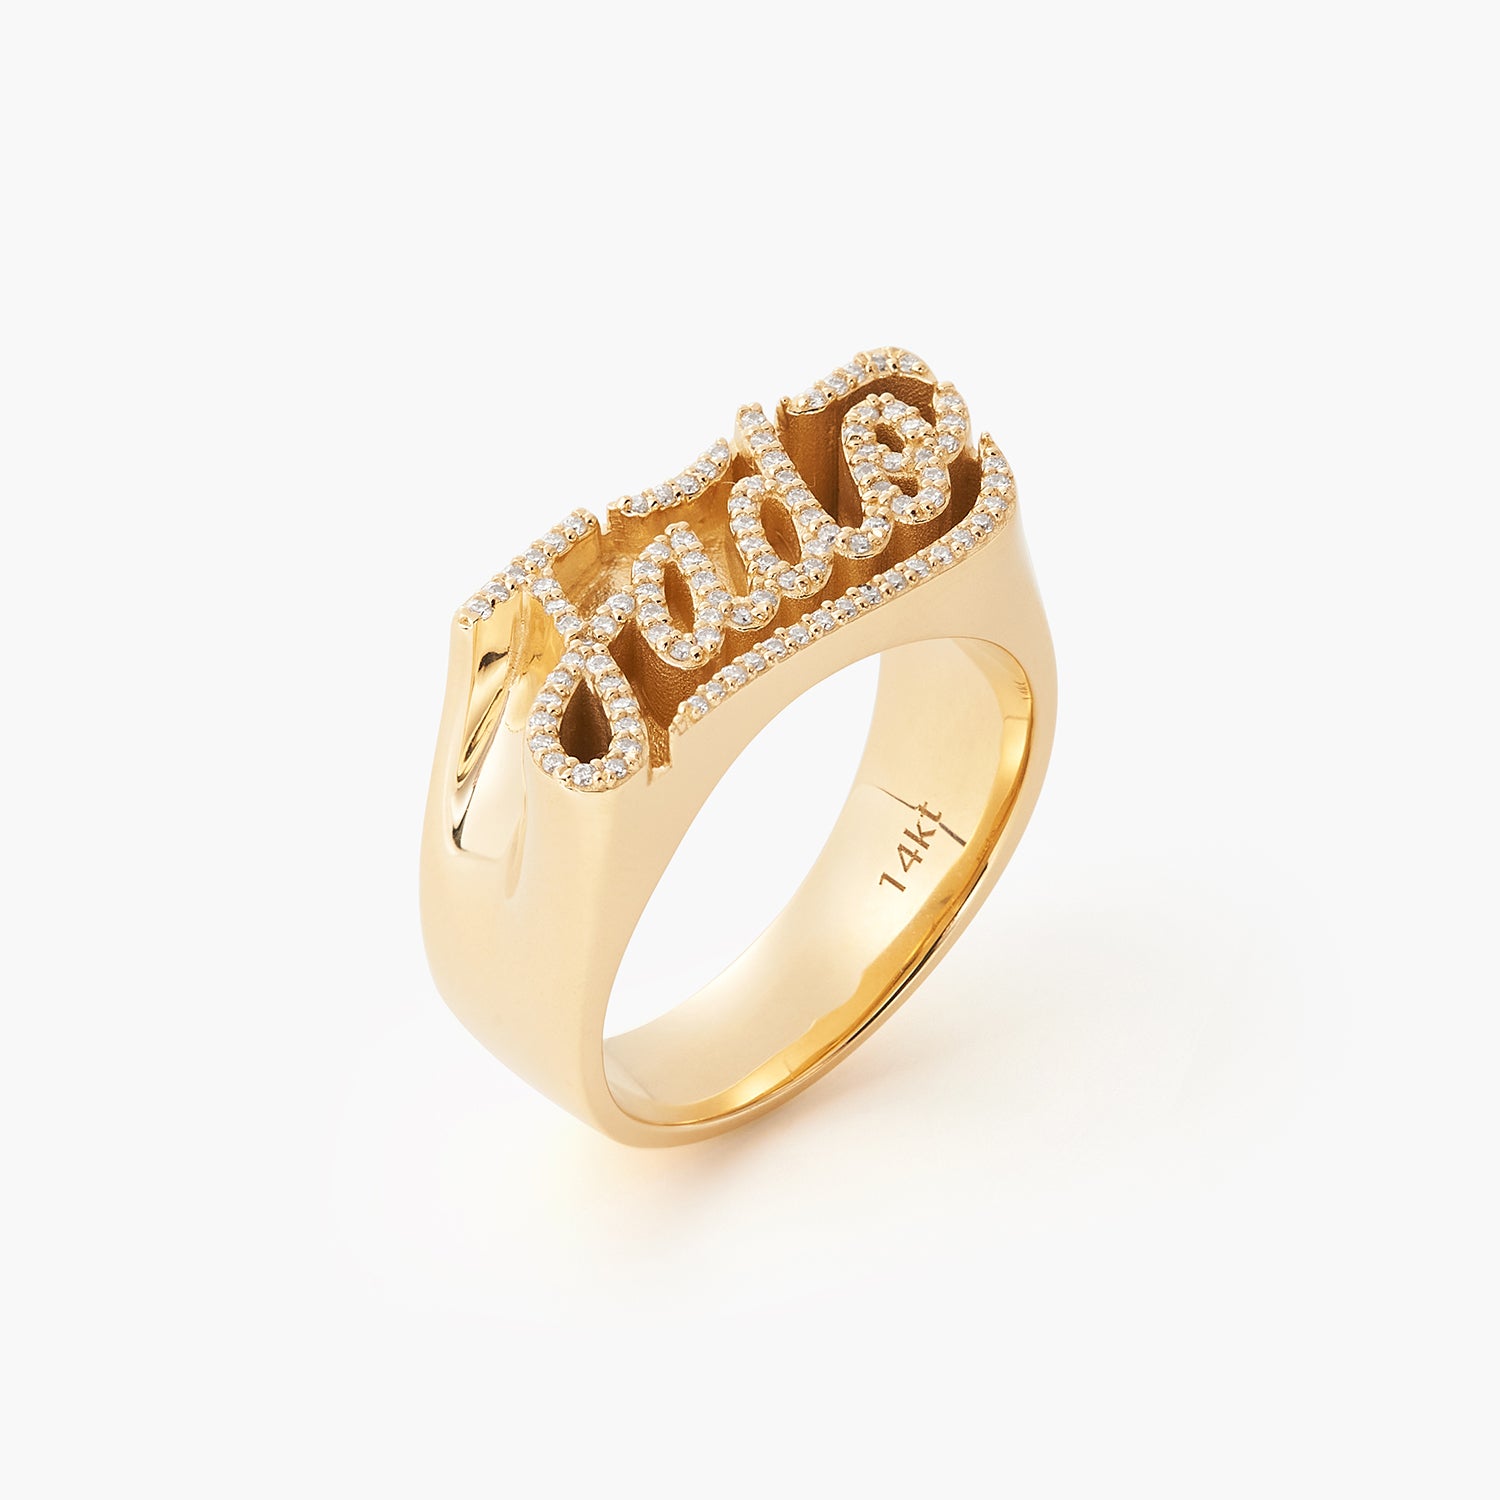 Customized Name Ring at Rs 300 | Sitapur | ID: 25724381562